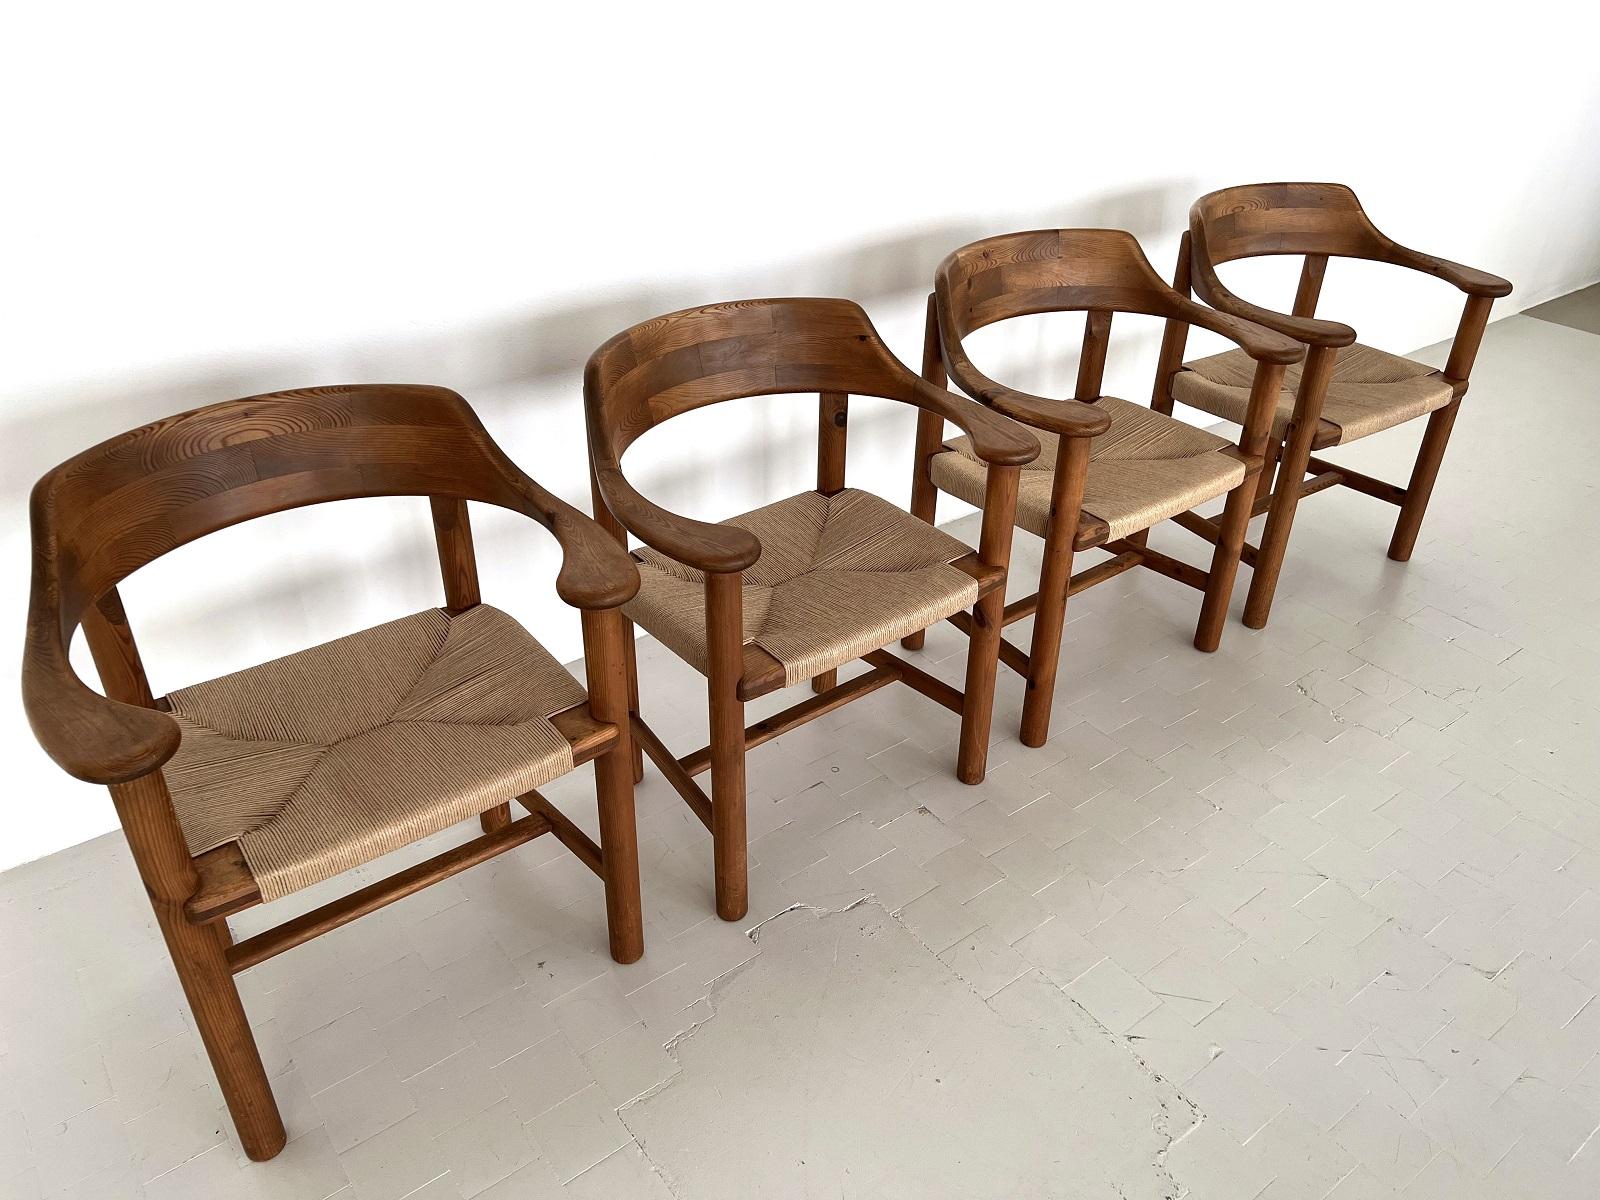 Rainer Daumiller Dining Chairs in Pine and New Paper Cord, 1970s For Sale 6